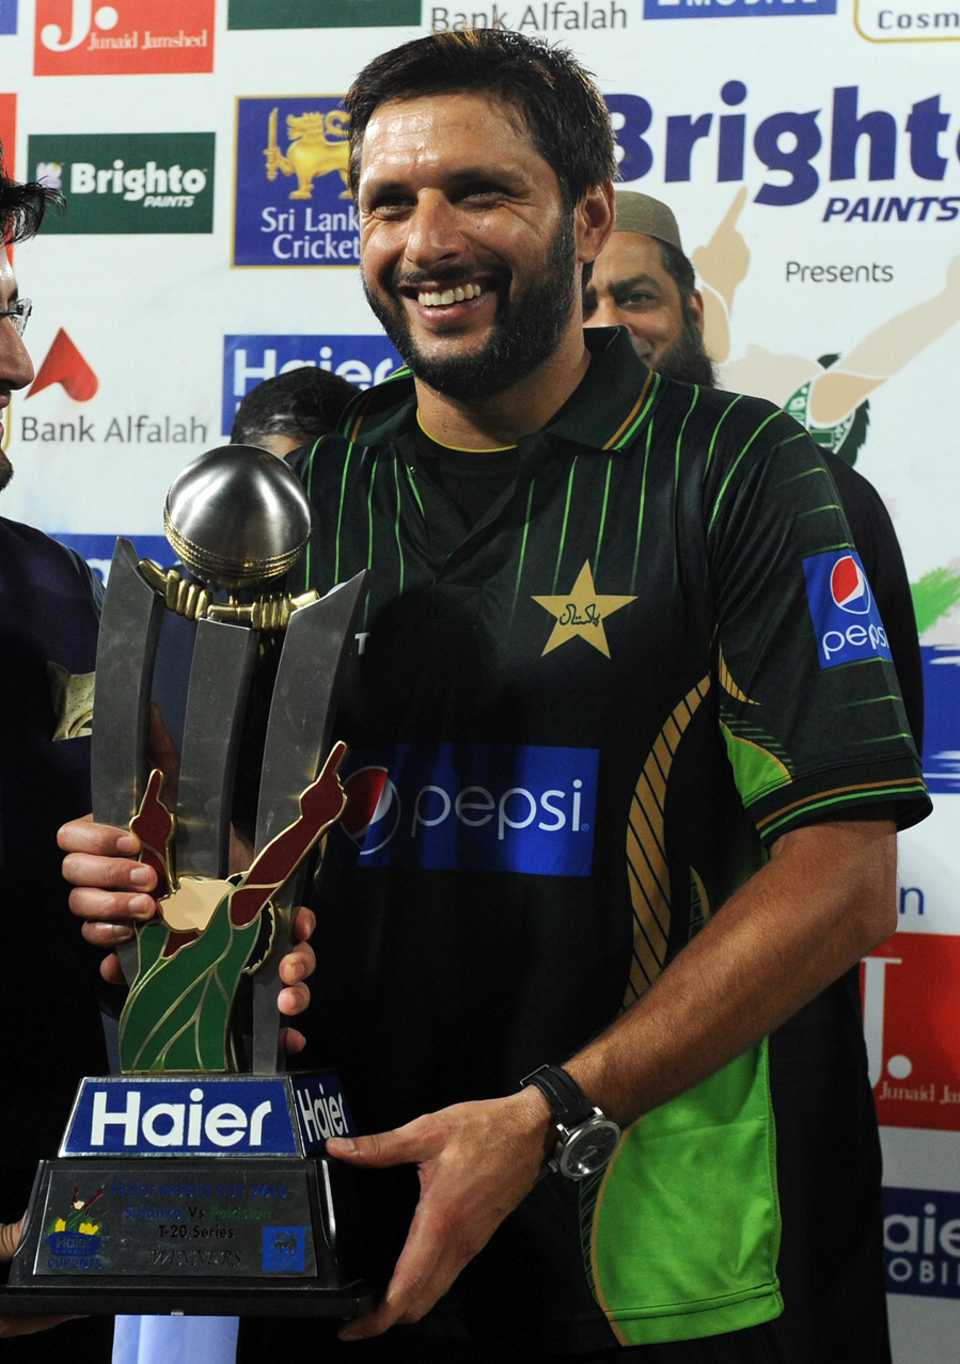 Shahid Afridi with the T20 trophy, which depicts a player doing his star-man celebration